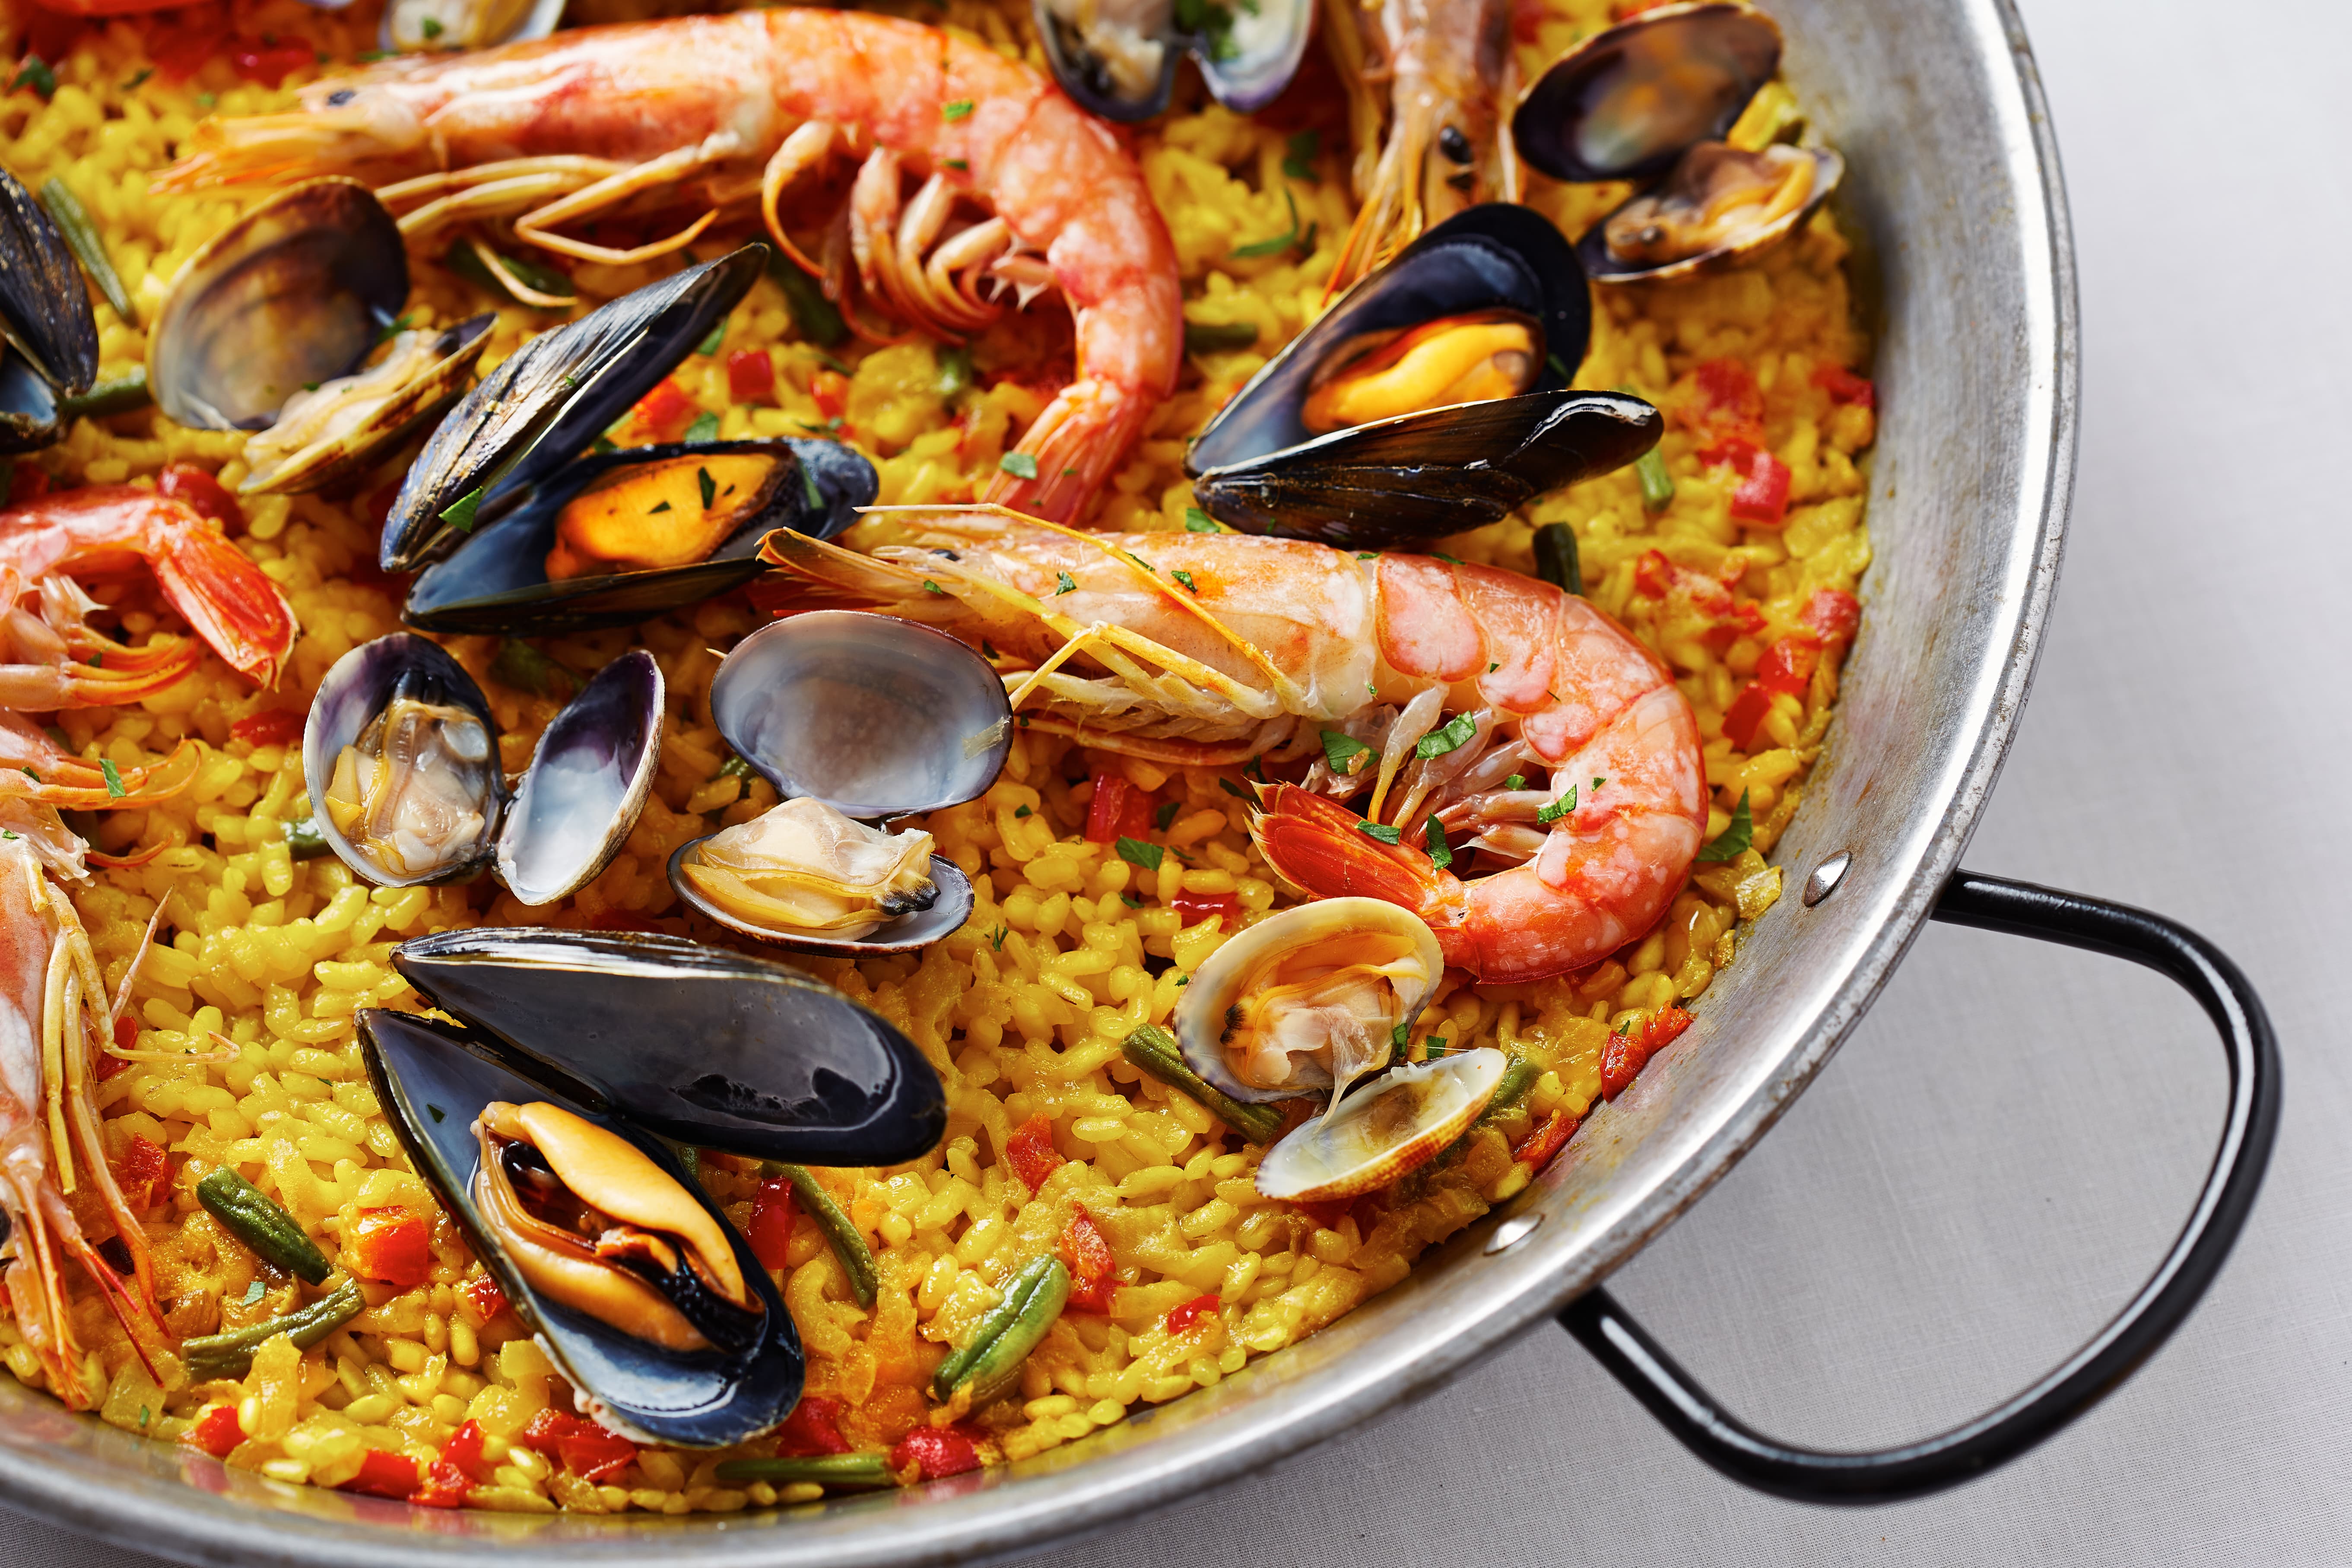 Famed paella, first created in Valencia